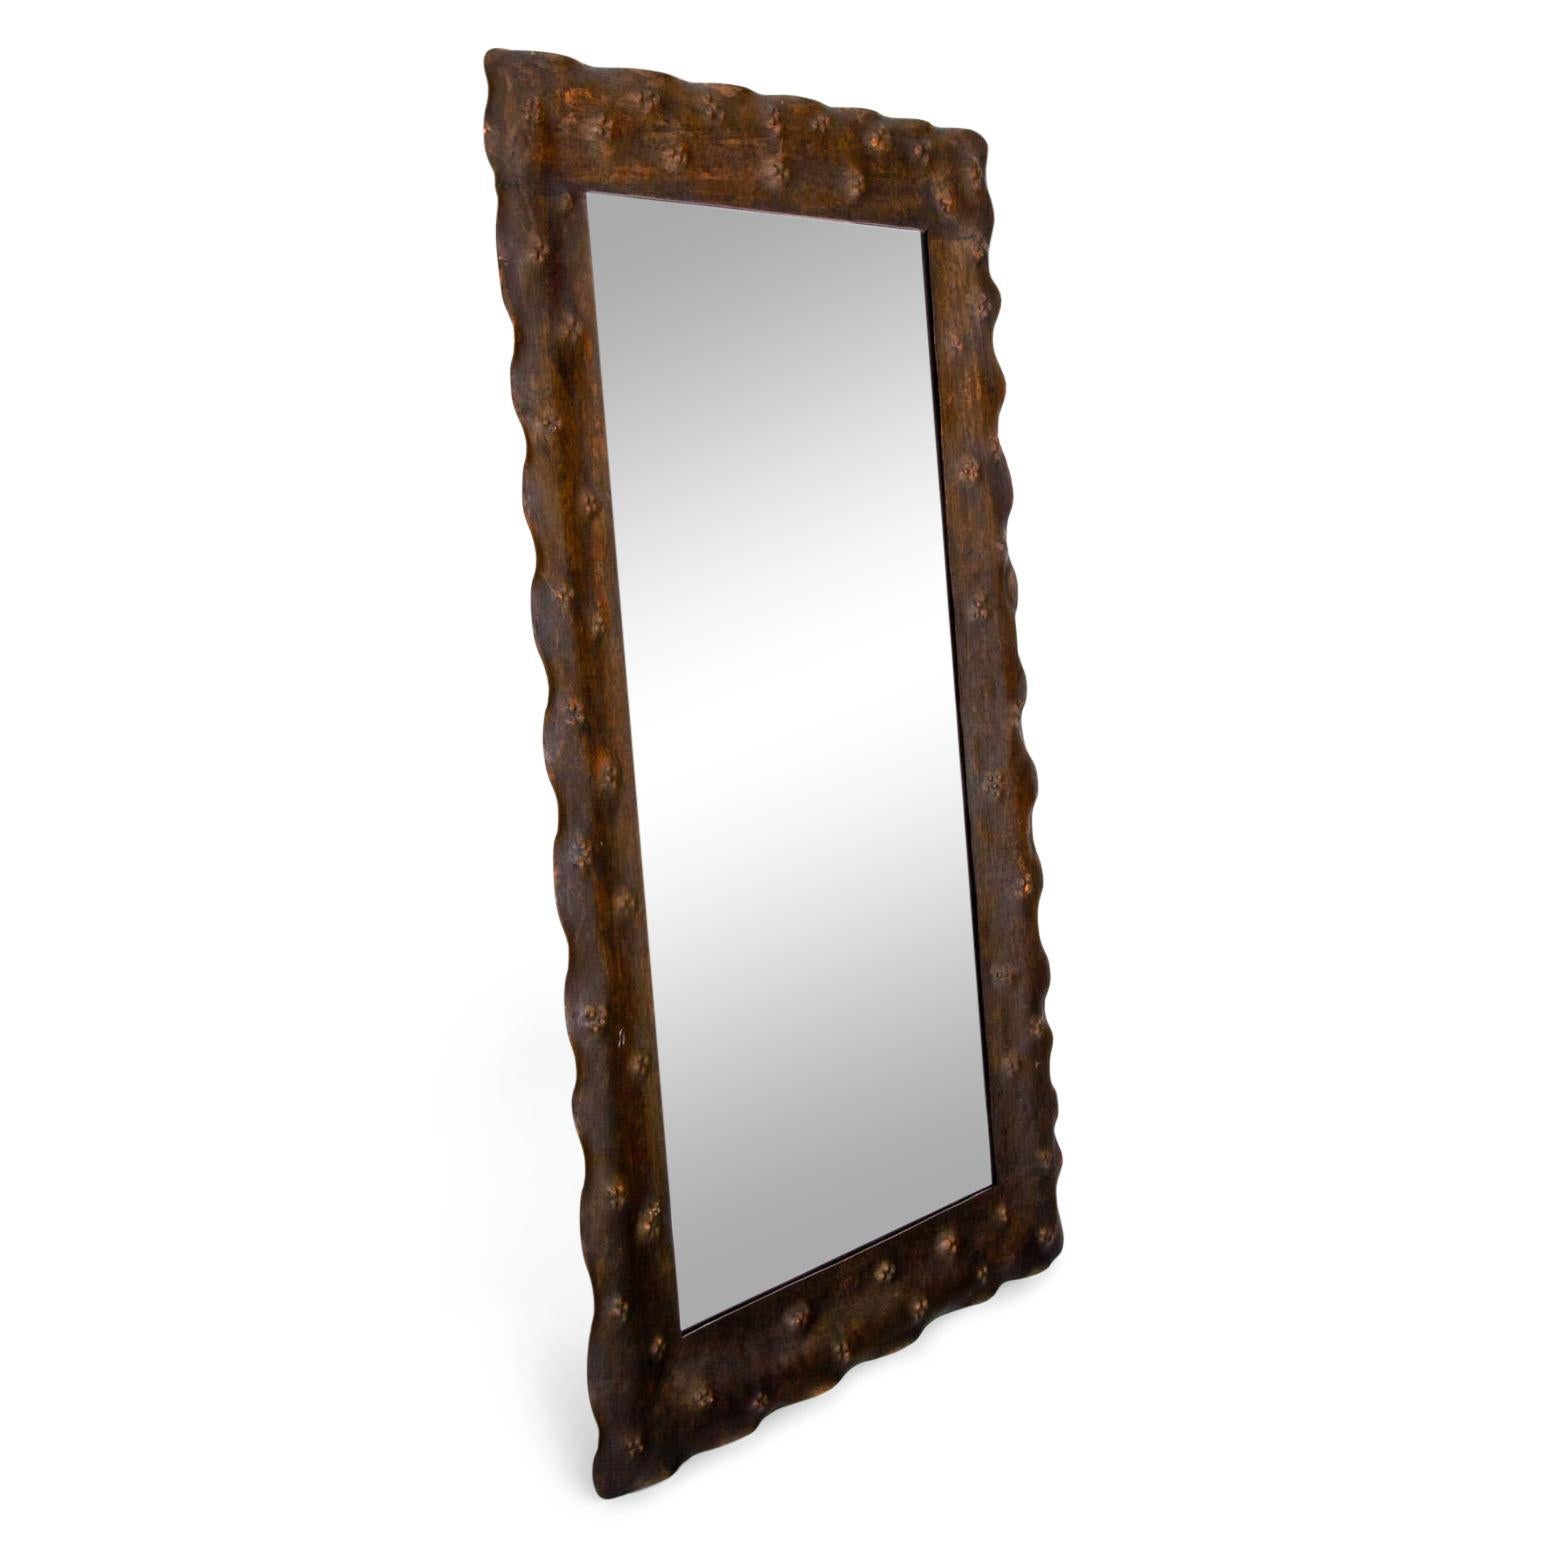 Rectangular wall mirror in a hammered and slightly wavy metal frame.